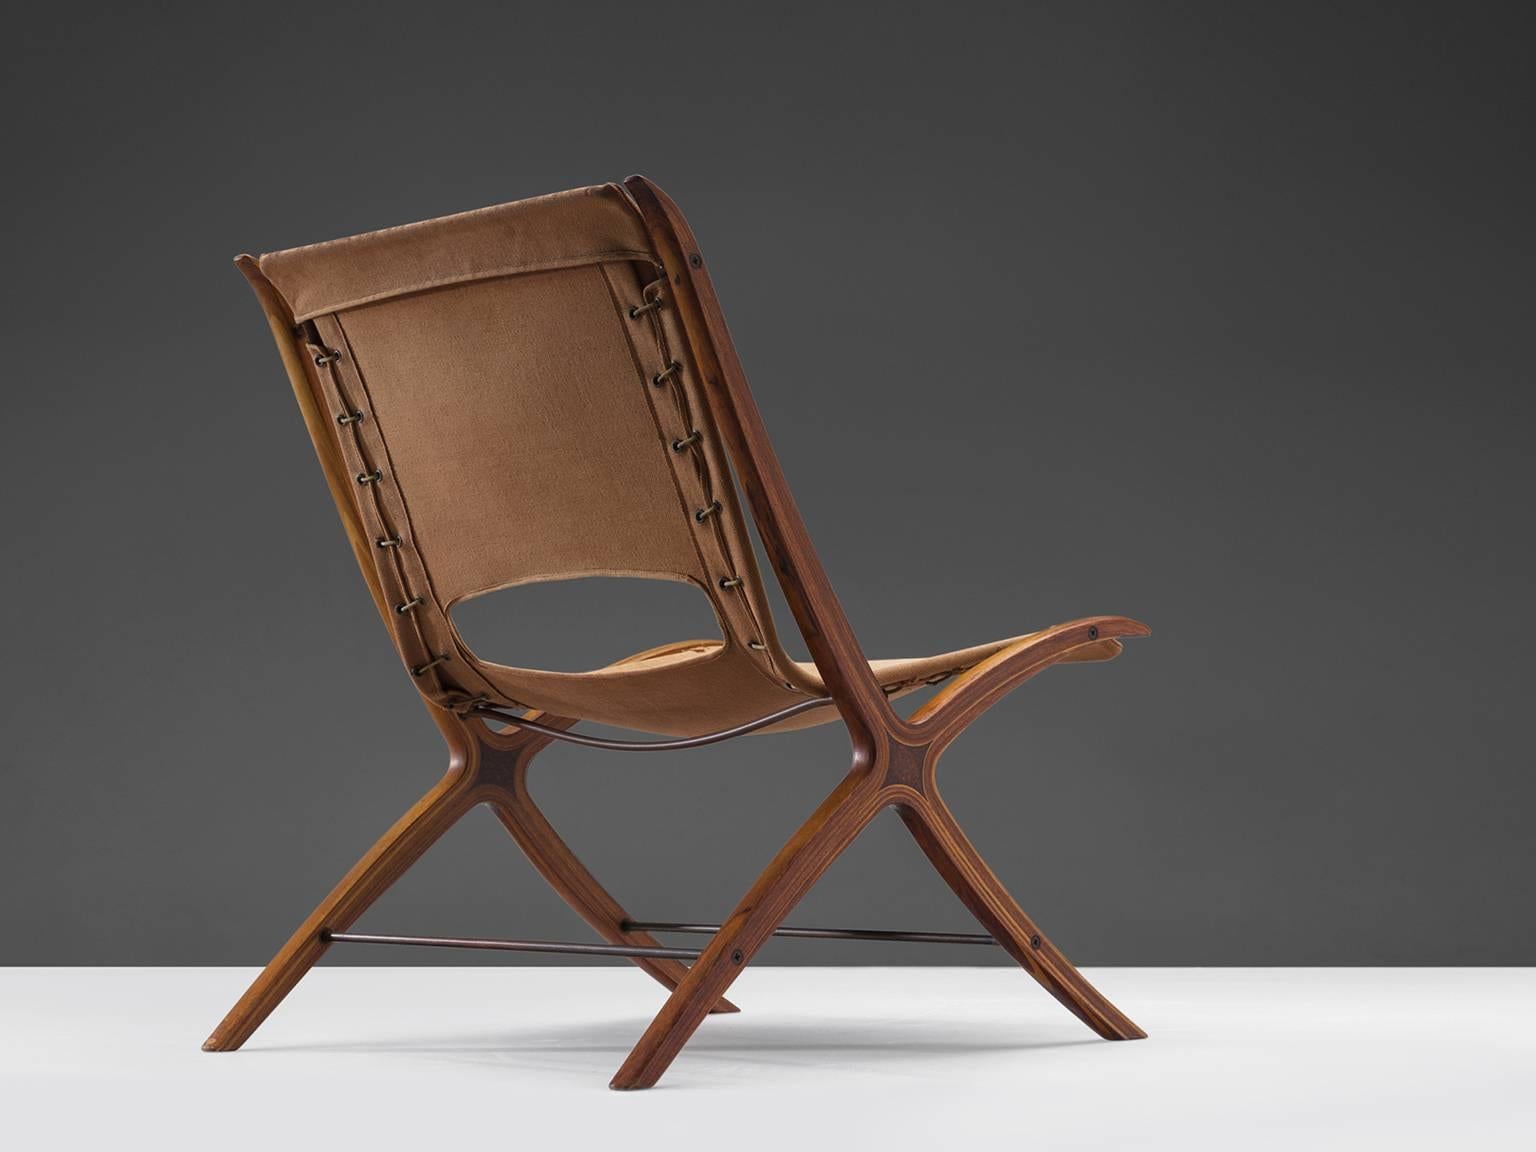 Peter Hvidt & Orla Mølgaard Nielsen for Fritz Hansen, X-chair 'model 6103', original cognac canvas upholstery, laminated, moulded mahogany frame and inlays of bird's-eye wood, 1958.

This chair is for obvious reasons nicknamed the X-chair. The